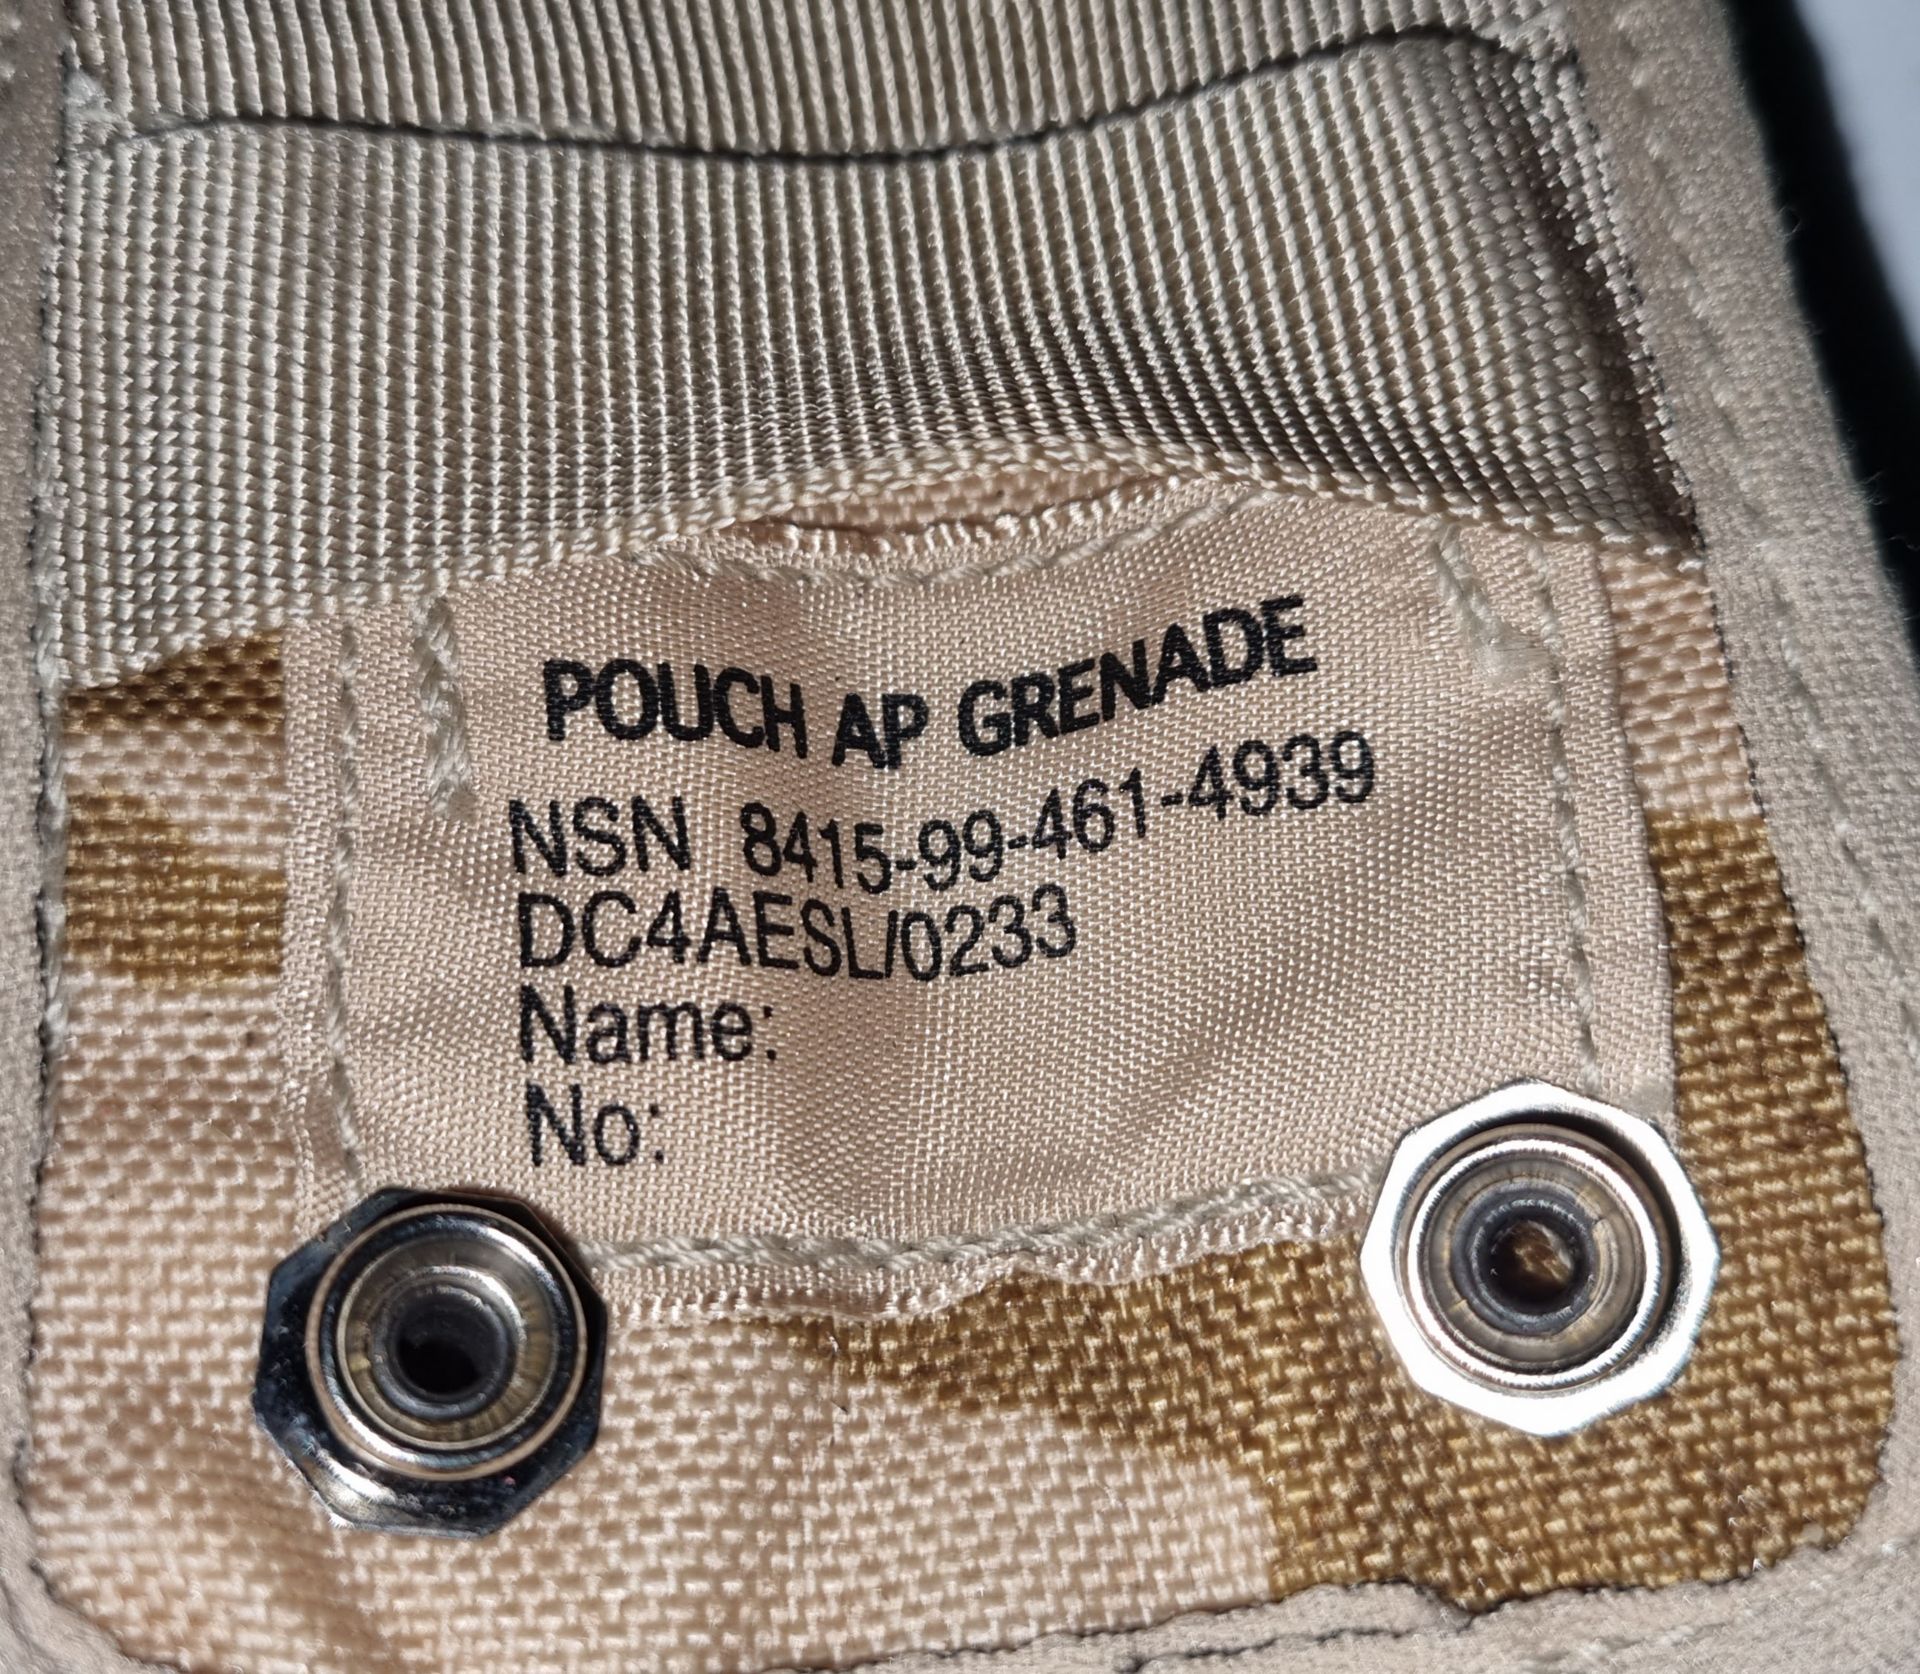 British Army Desert AP grenade pouch - Image 4 of 4